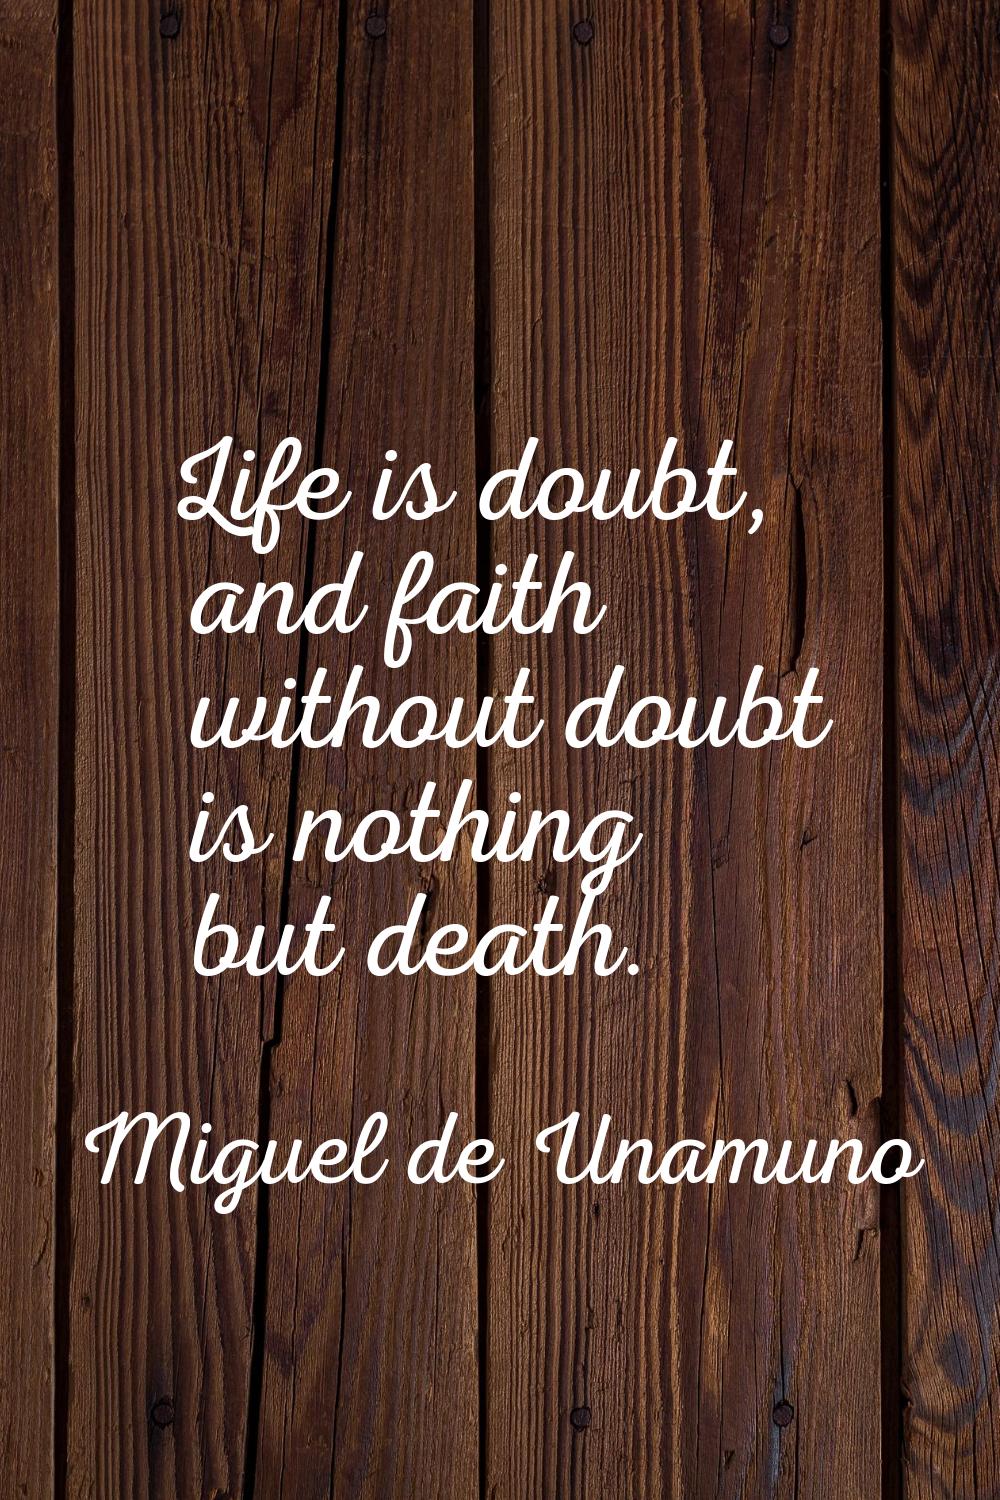 Life is doubt, and faith without doubt is nothing but death.